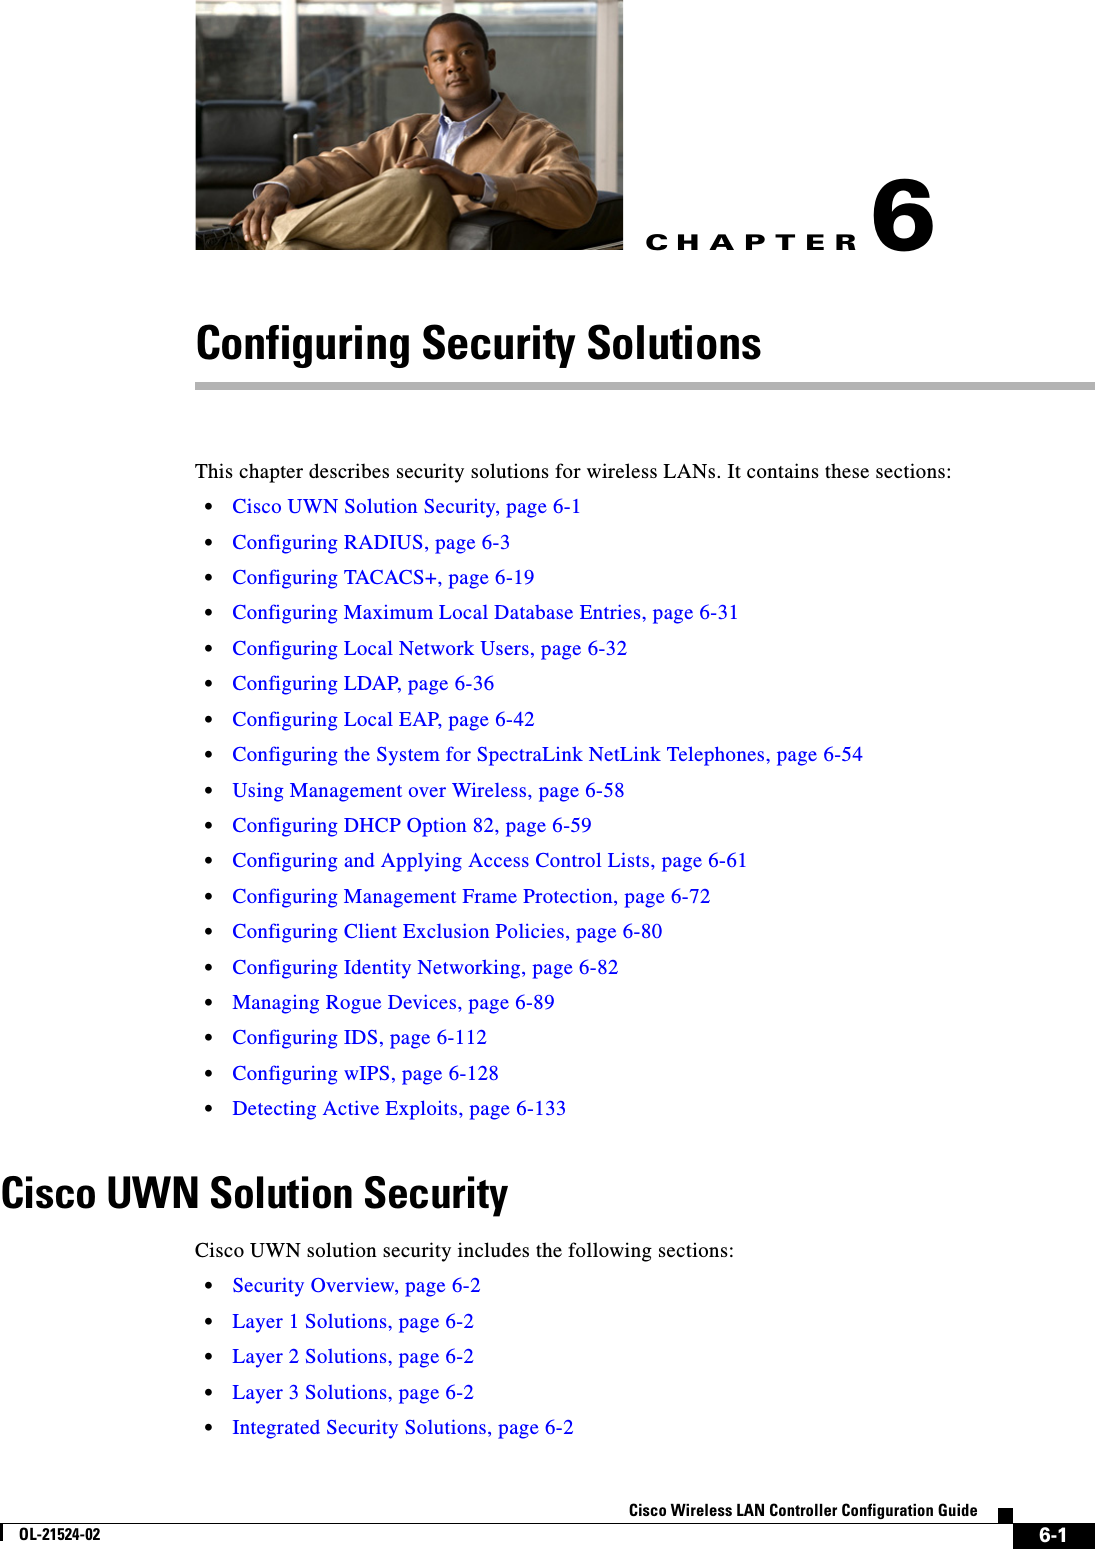 CHAPTER6-1Cisco Wireless LAN Controller Configuration GuideOL-21524-026Configuring Security SolutionsThis chapter describes security solutions for wireless LANs. It contains these sections:  • Cisco UWN Solution Security, page 6-1  • Configuring RADIUS, page 6-3  • Configuring TACACS+, page 6-19  • Configuring Maximum Local Database Entries, page 6-31  • Configuring Local Network Users, page 6-32  • Configuring LDAP, page 6-36  • Configuring Local EAP, page 6-42  • Configuring the System for SpectraLink NetLink Telephones, page 6-54  • Using Management over Wireless, page 6-58  • Configuring DHCP Option 82, page 6-59  • Configuring and Applying Access Control Lists, page 6-61  • Configuring Management Frame Protection, page 6-72  • Configuring Client Exclusion Policies, page 6-80  • Configuring Identity Networking, page 6-82  • Managing Rogue Devices, page 6-89  • Configuring IDS, page 6-112  • Configuring wIPS, page 6-128  • Detecting Active Exploits, page 6-133Cisco UWN Solution SecurityCisco UWN solution security includes the following sections:  • Security Overview, page 6-2  • Layer 1 Solutions, page 6-2  • Layer 2 Solutions, page 6-2  • Layer 3 Solutions, page 6-2  • Integrated Security Solutions, page 6-2